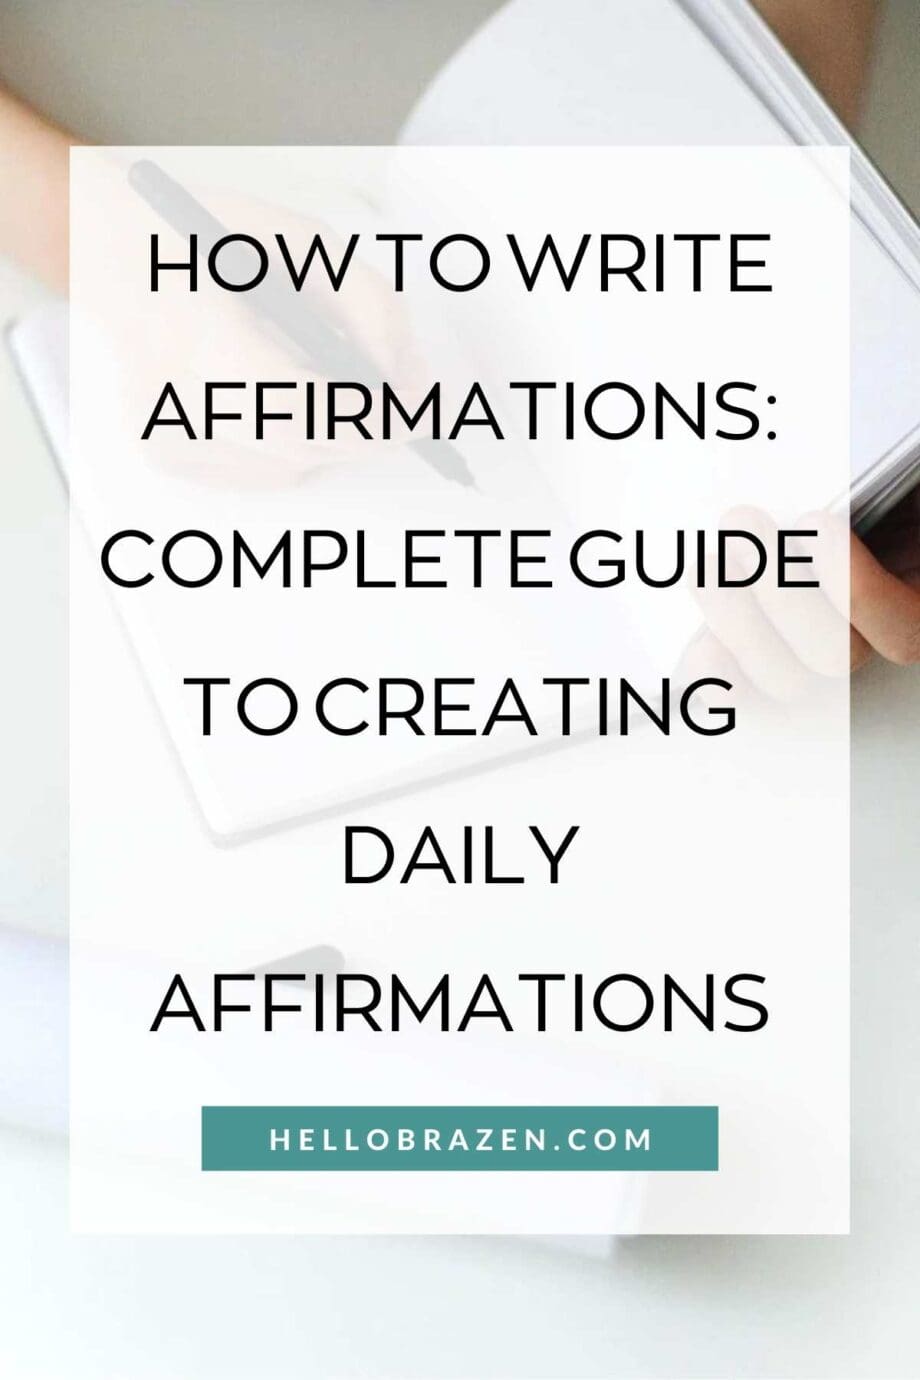 Learning how to write affirmations can be a powerful way to include positive affirmations in your daily life and be more positive in your day.